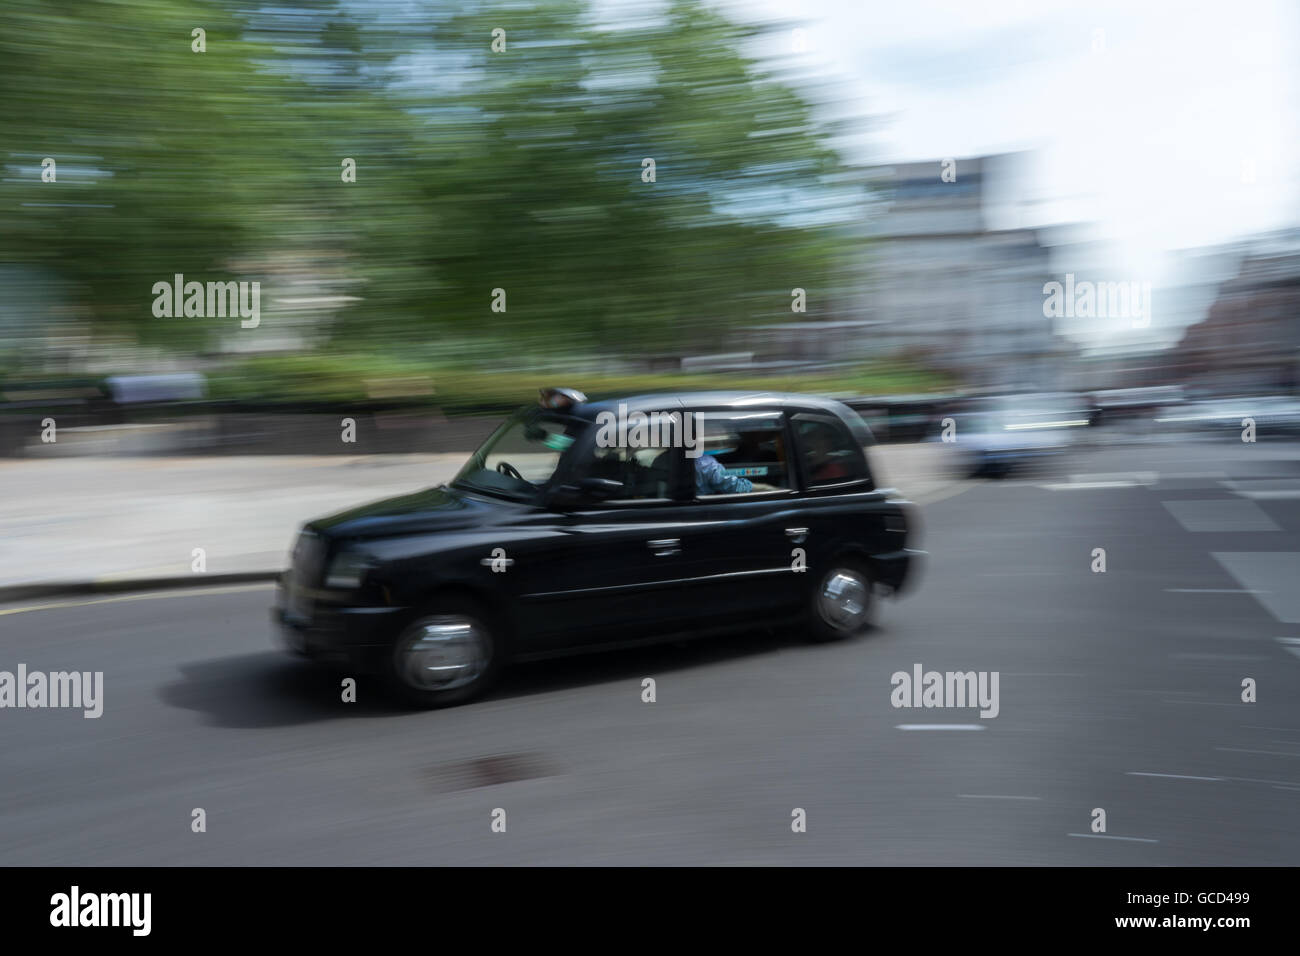 London Black Taxi Cab in motion in traffic Stock Photo